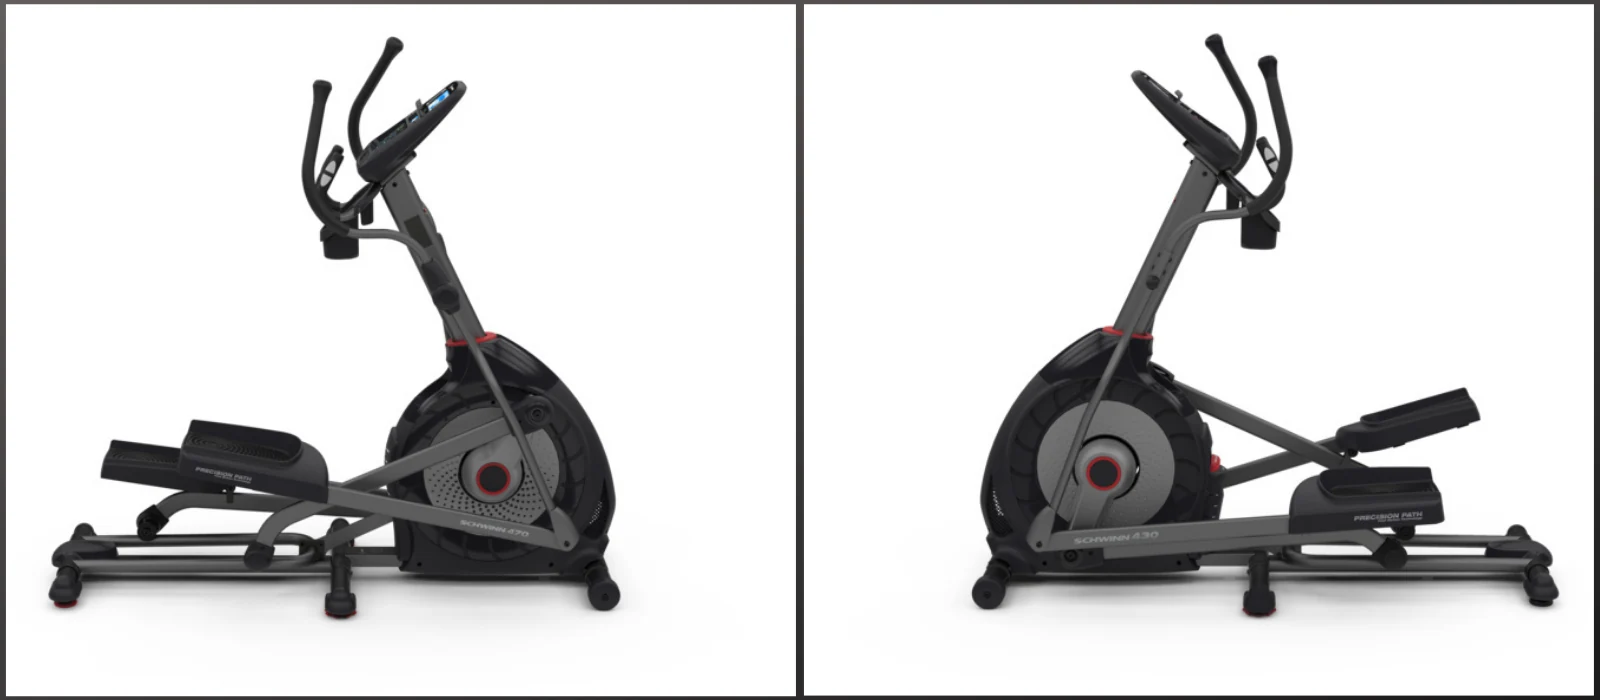 The frame of the elliptical 430 & the 470